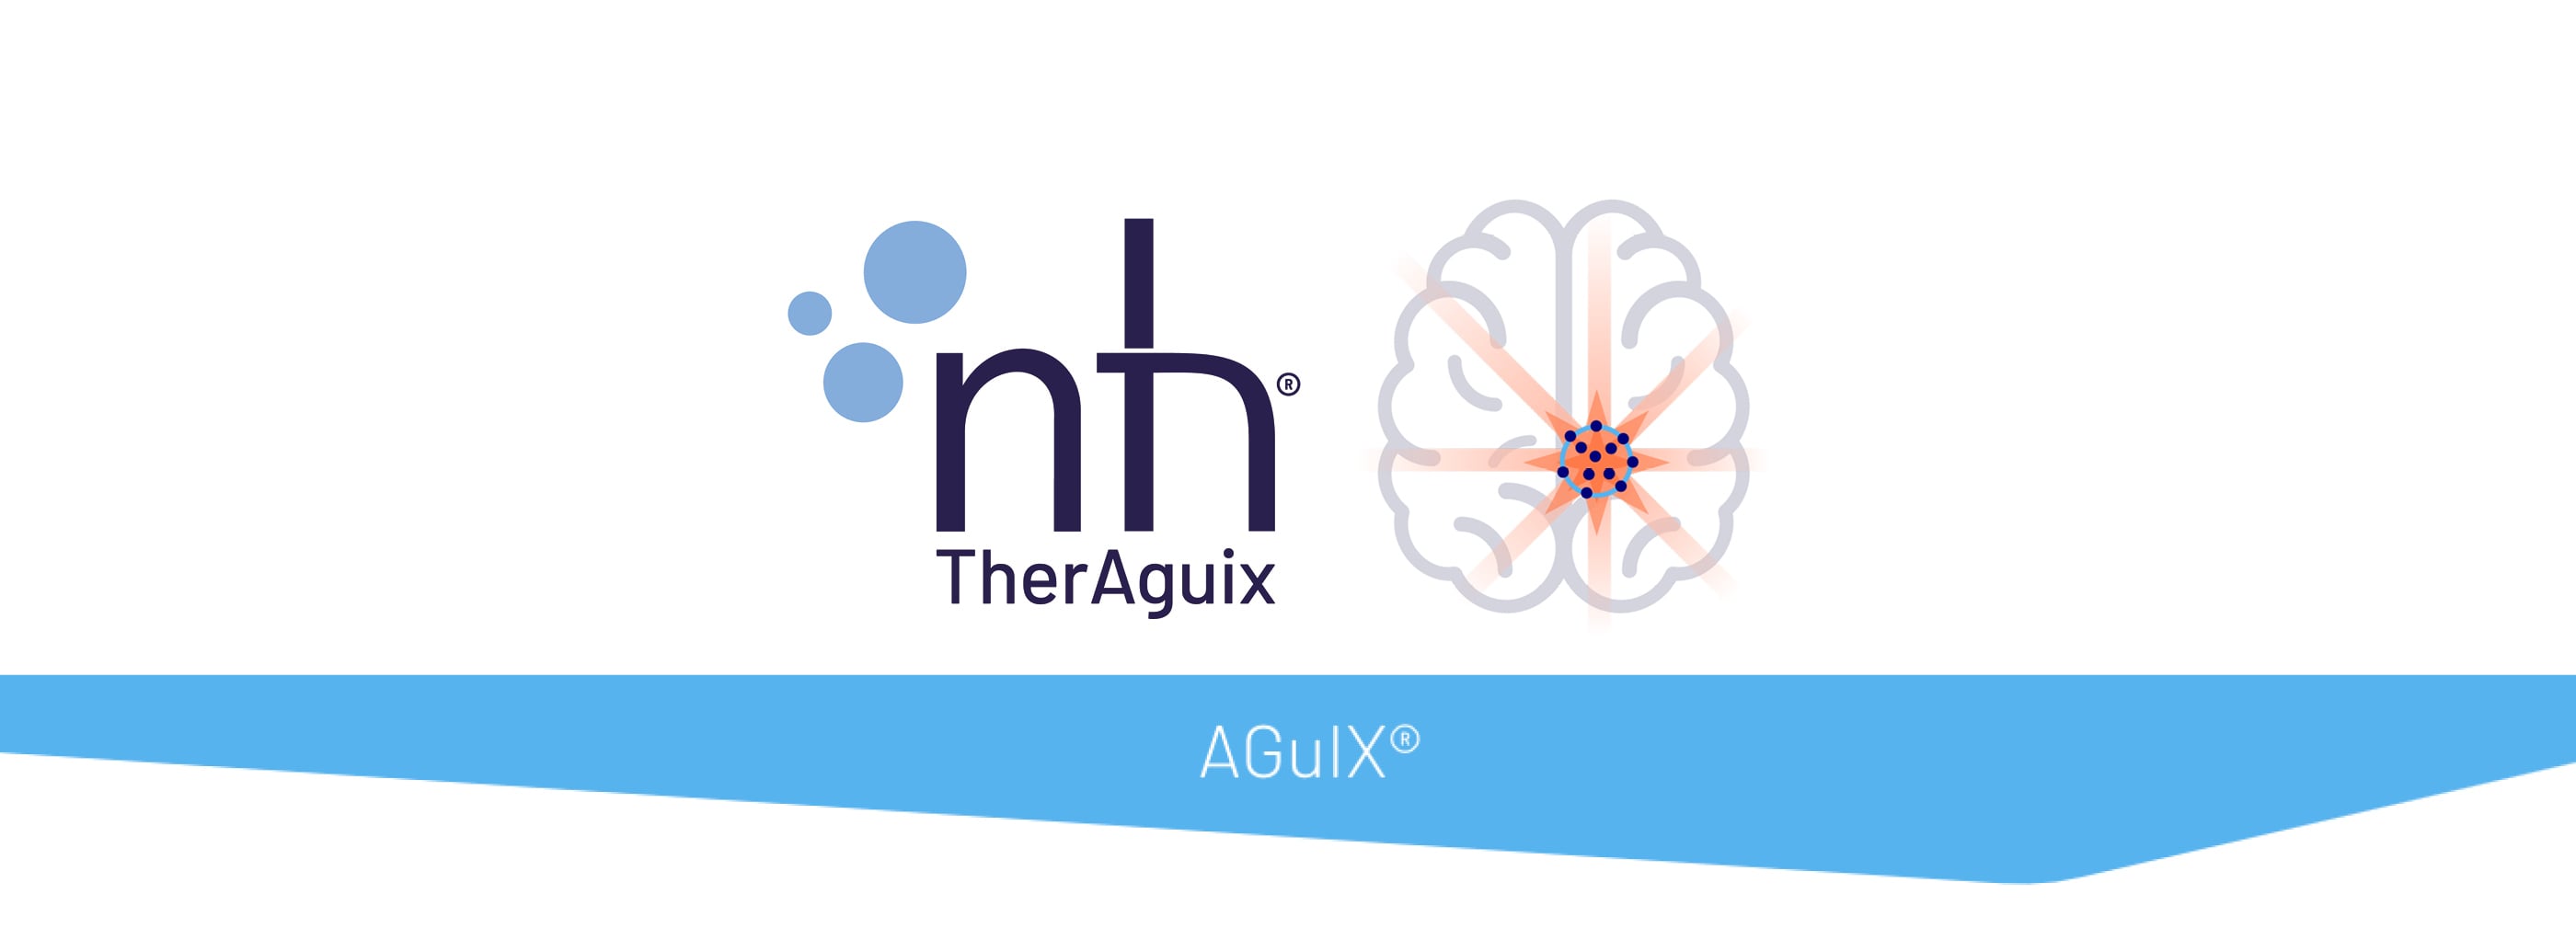 NH TherAguix announces the release of a new clinical batch for its drug AGuIX, manufactured by CARBOGEN AMCIS